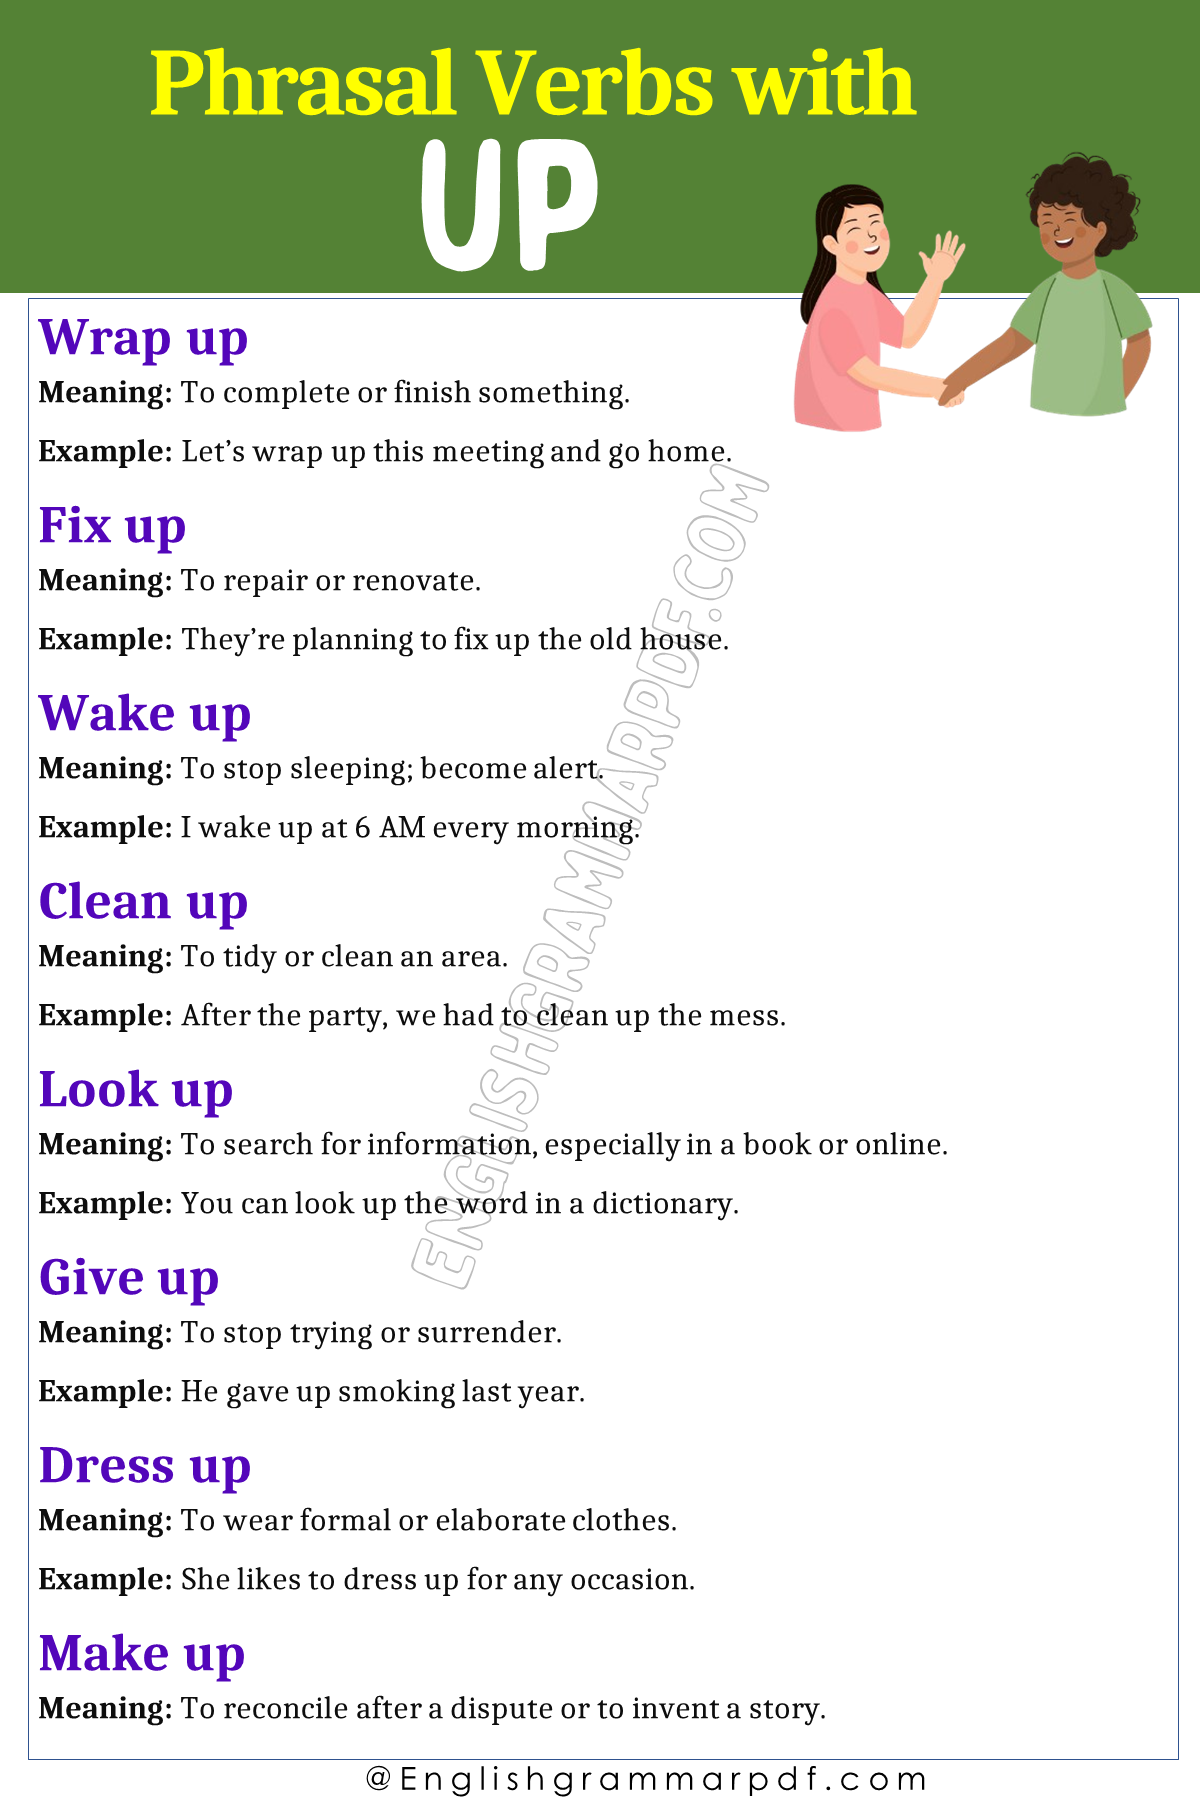 Phrasal Verbs with Up